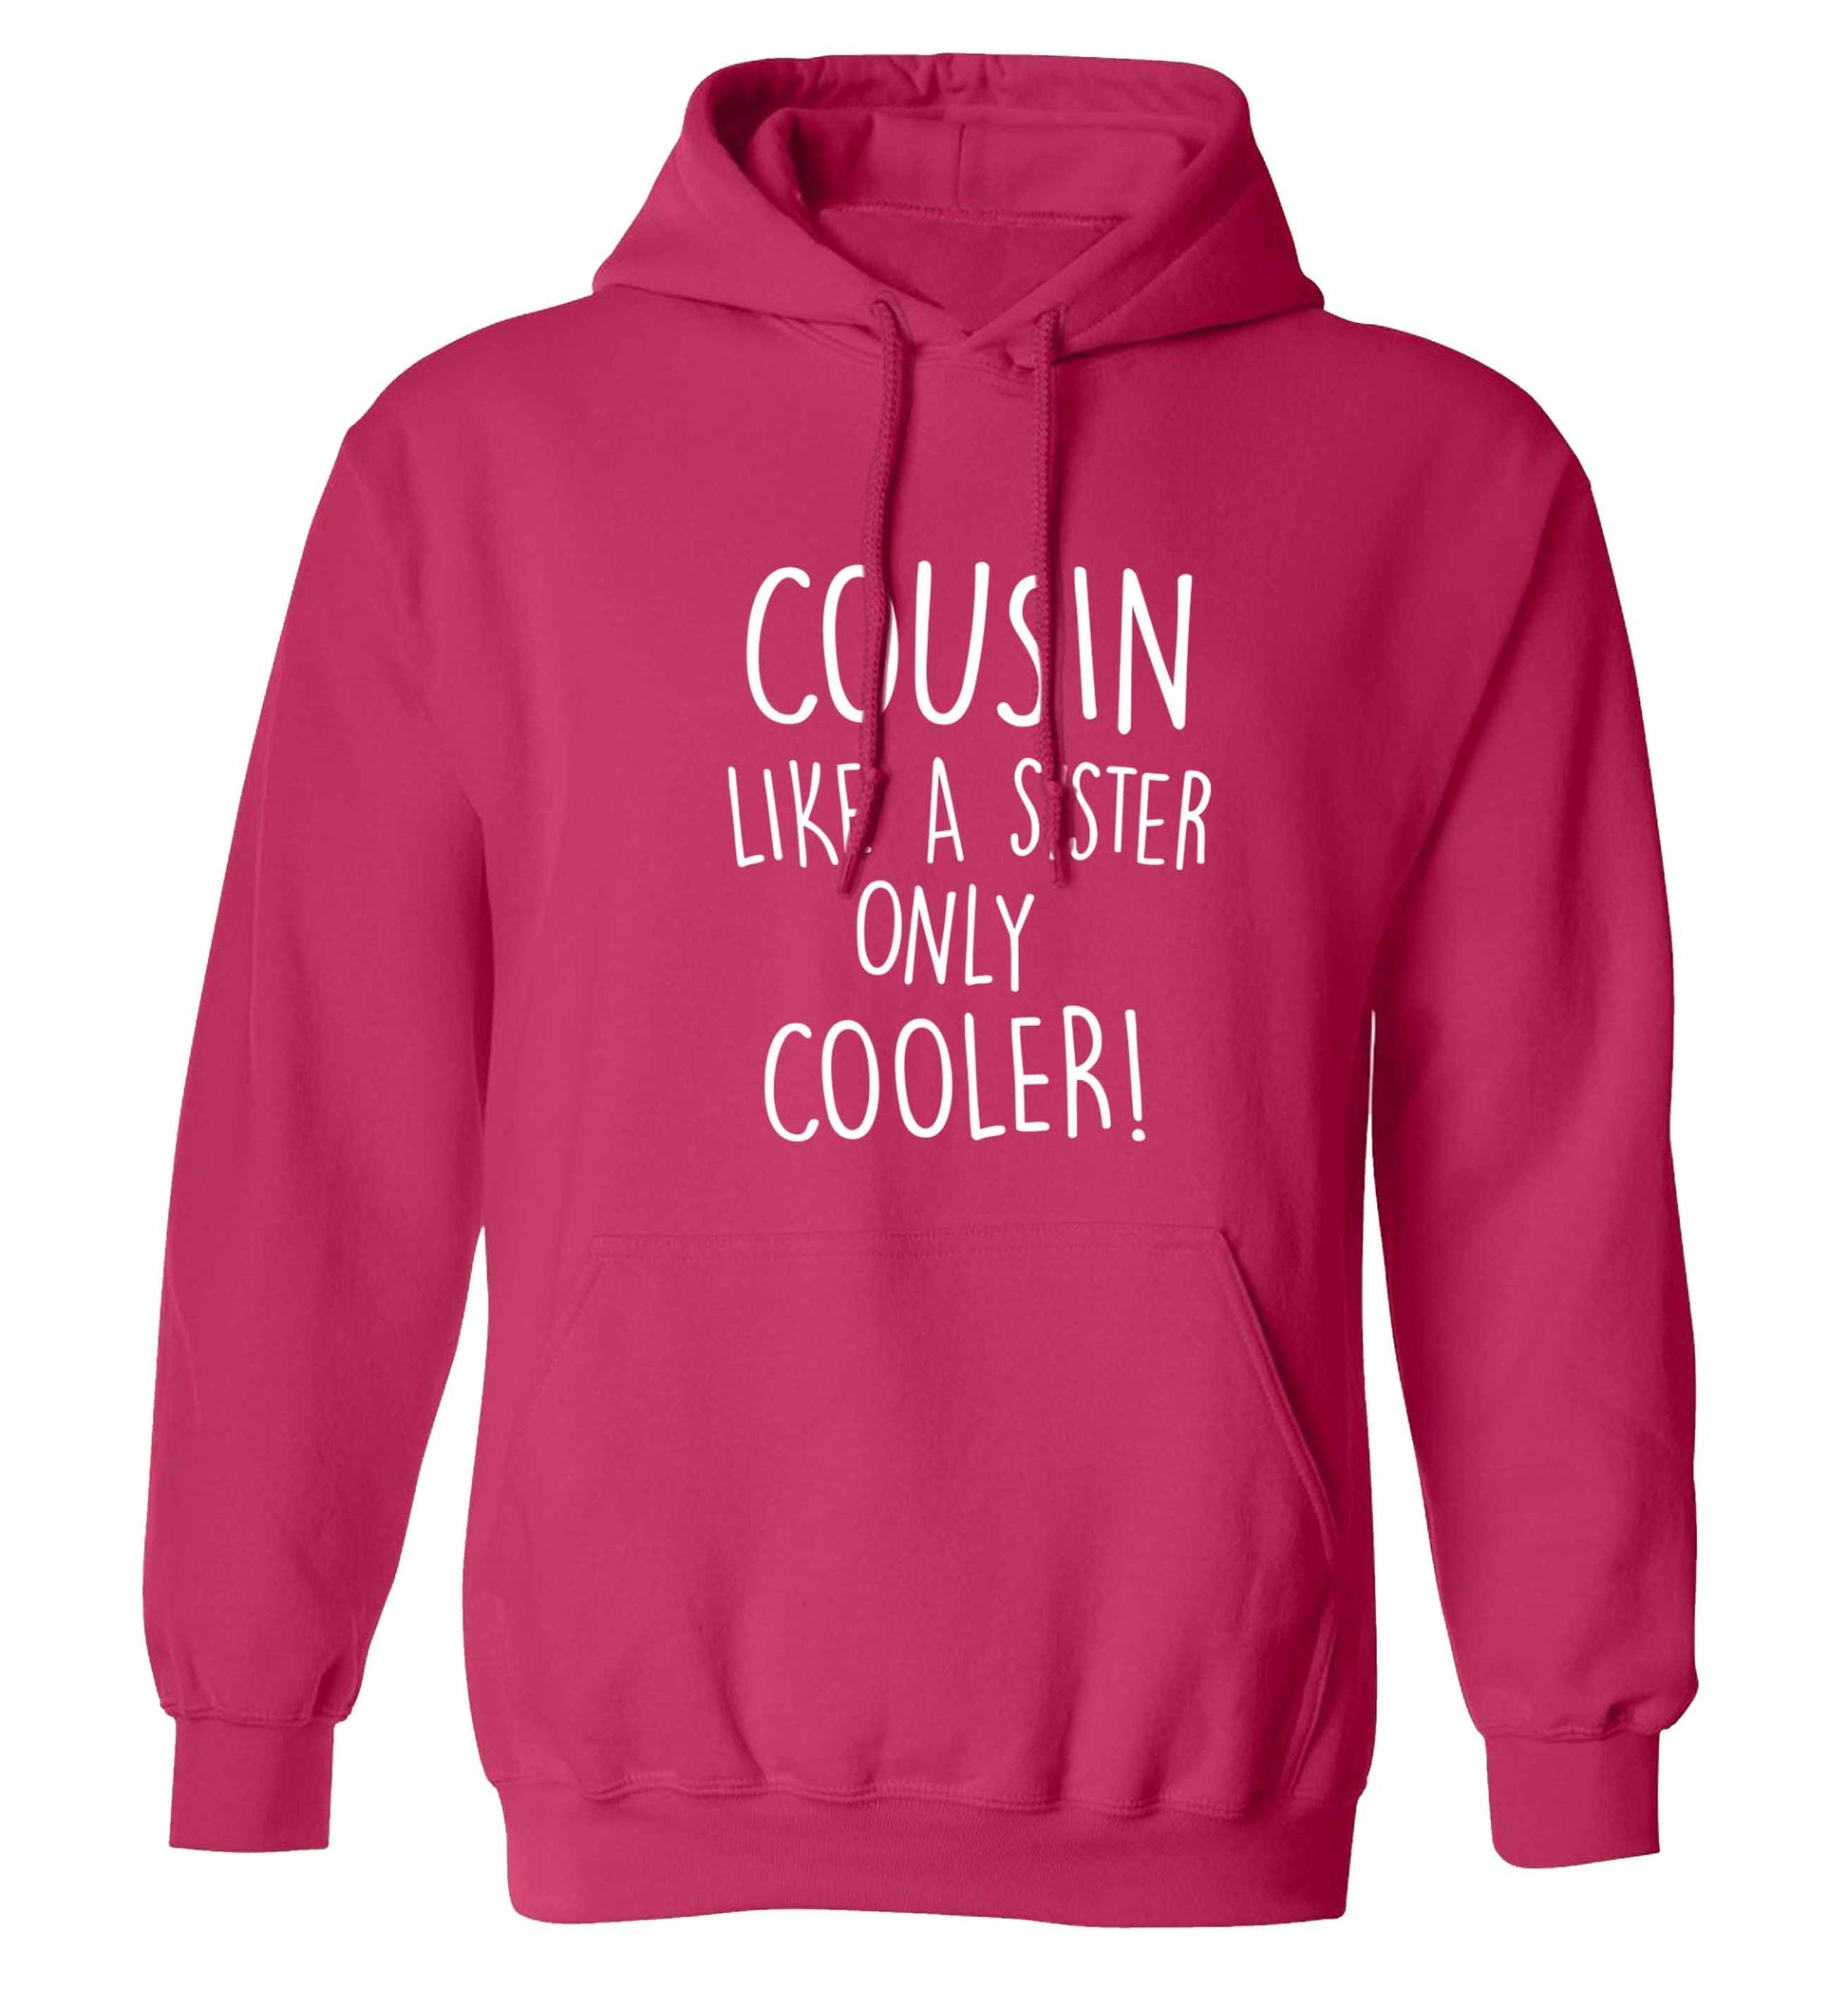 Cousin like a sister only cooler adults unisex pink hoodie 2XL